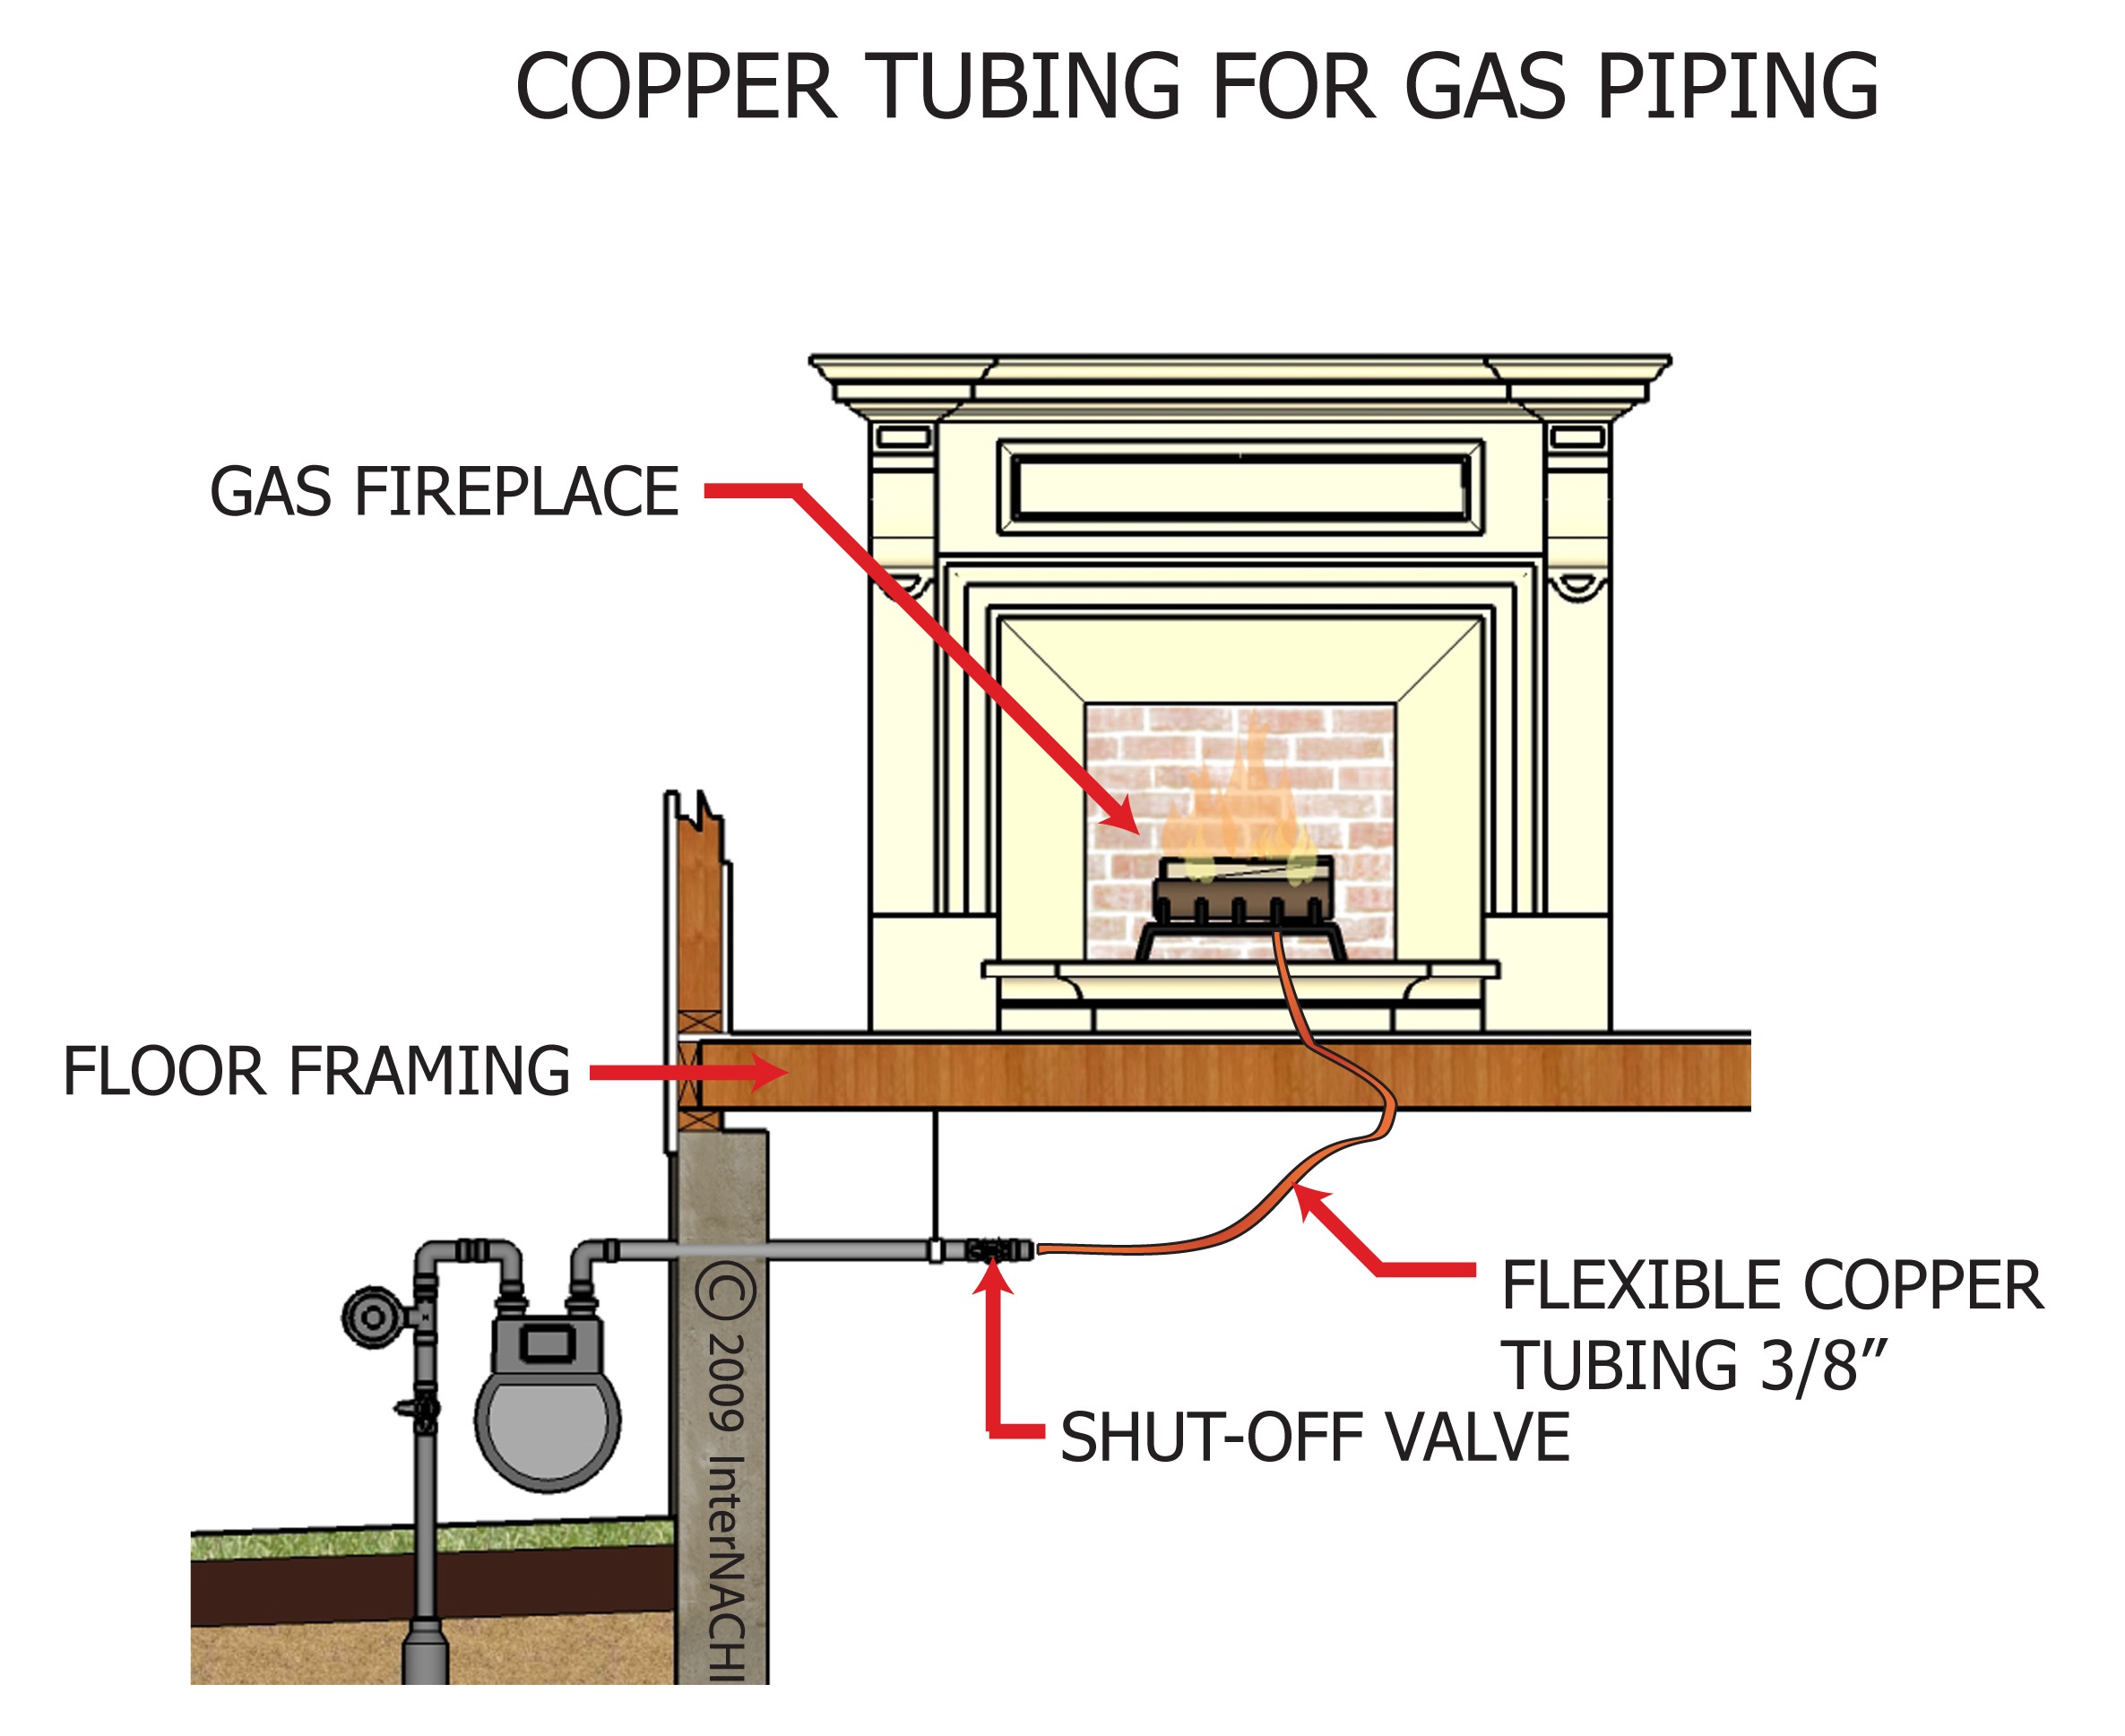 Copper tubing for gas piping.